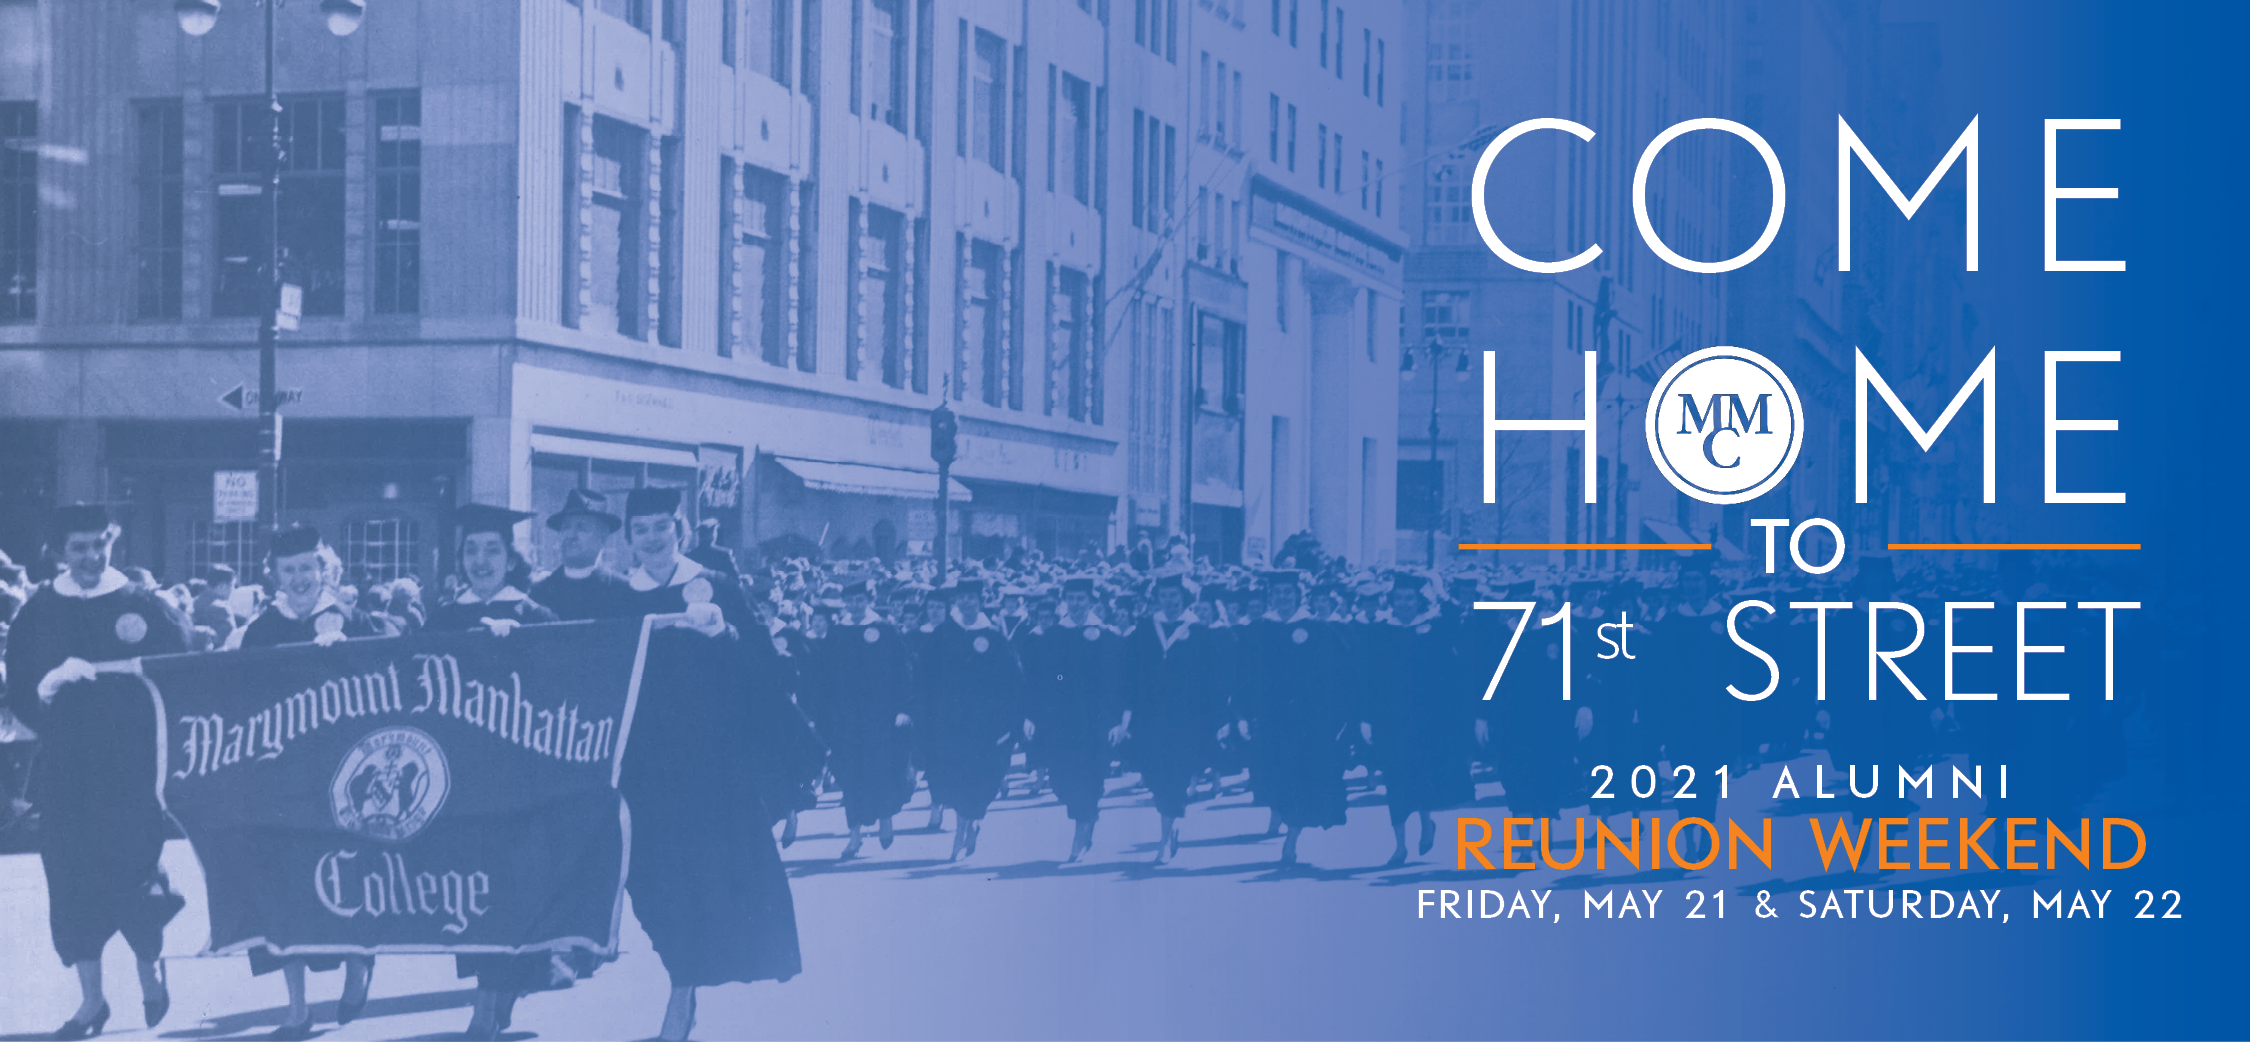 2021 Alumni Reunion Weekend will be on Friday, May 21 and Saturday, May 22